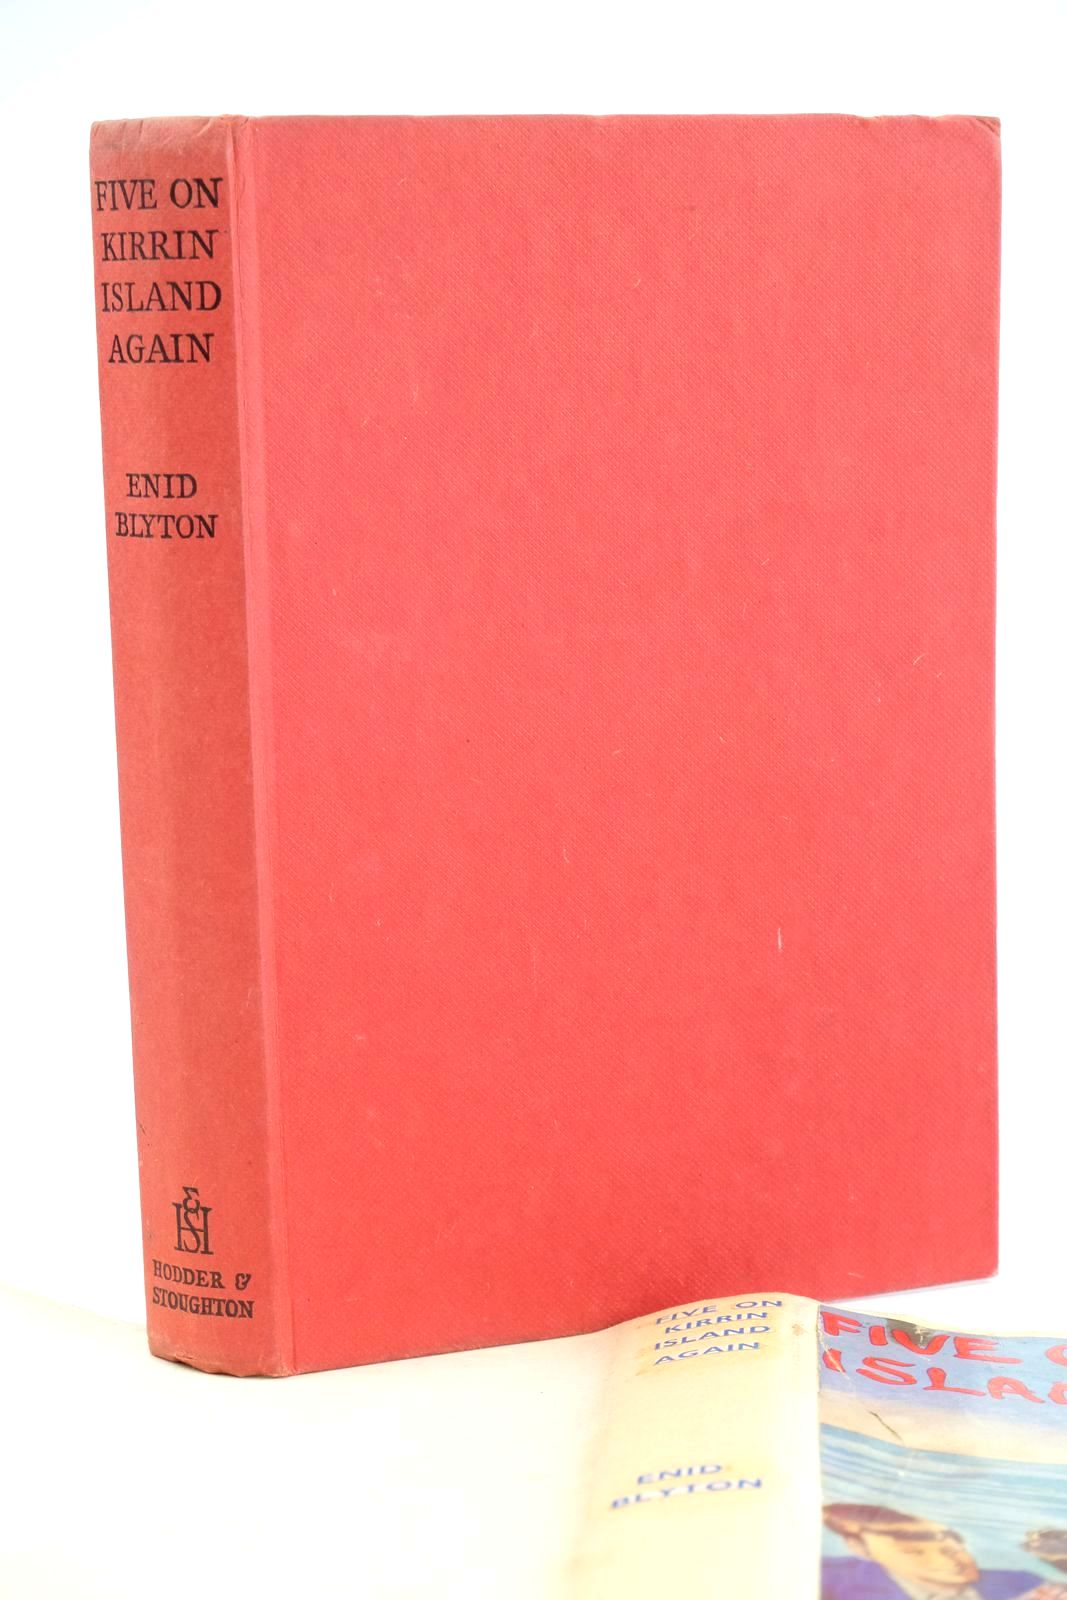 Photo of FIVE ON KIRRIN ISLAND AGAIN written by Blyton, Enid illustrated by Soper, Eileen published by Hodder & Stoughton (STOCK CODE: 1324888)  for sale by Stella & Rose's Books